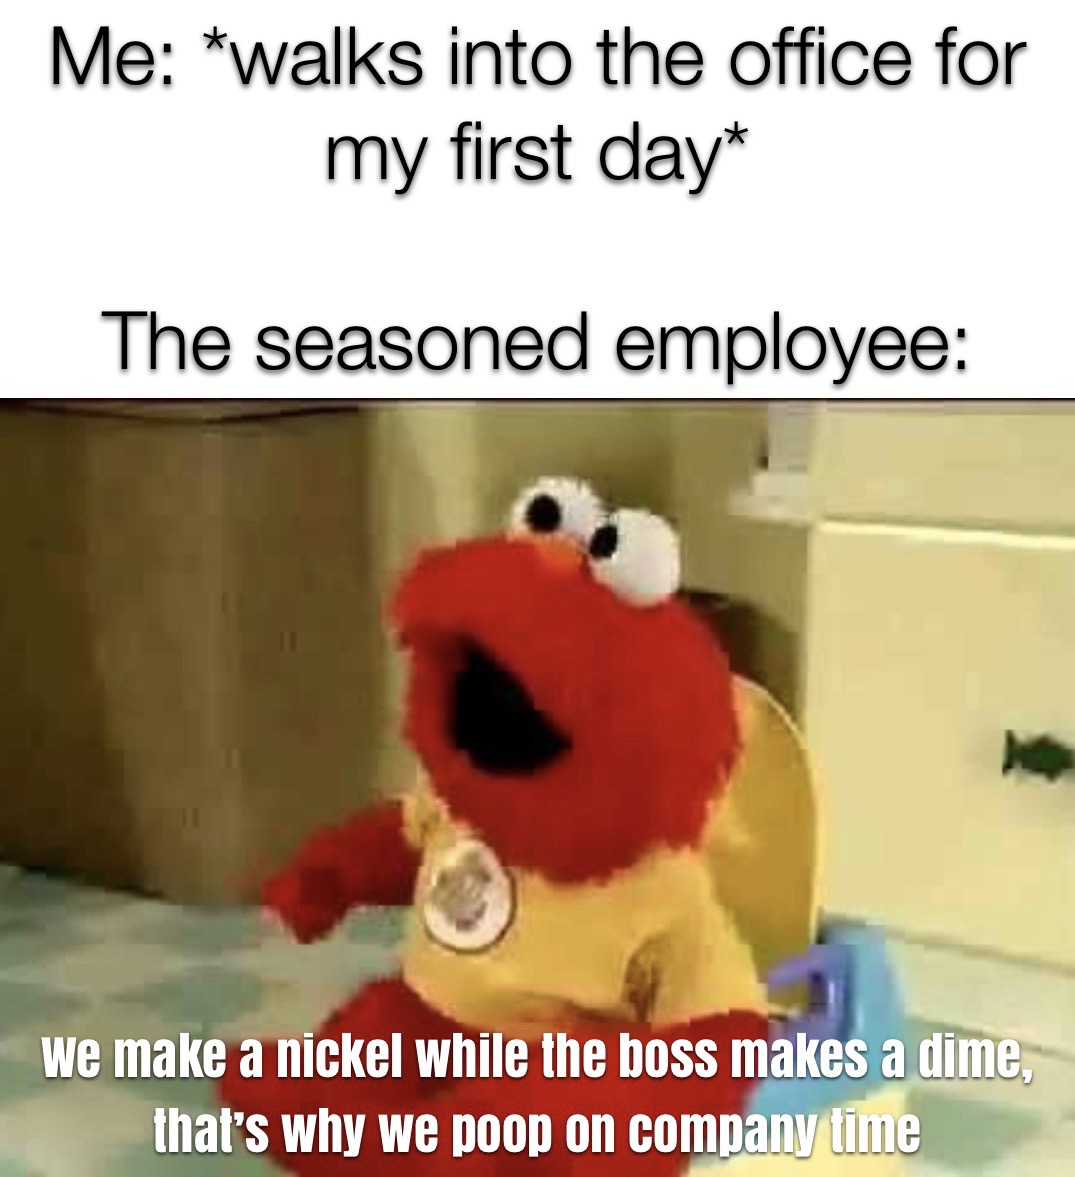 dank memes - funny memes - photo caption - Me walks into the office for my first day The seasoned employee we make a nickel while the boss makes a dime, that's why we poop on company time